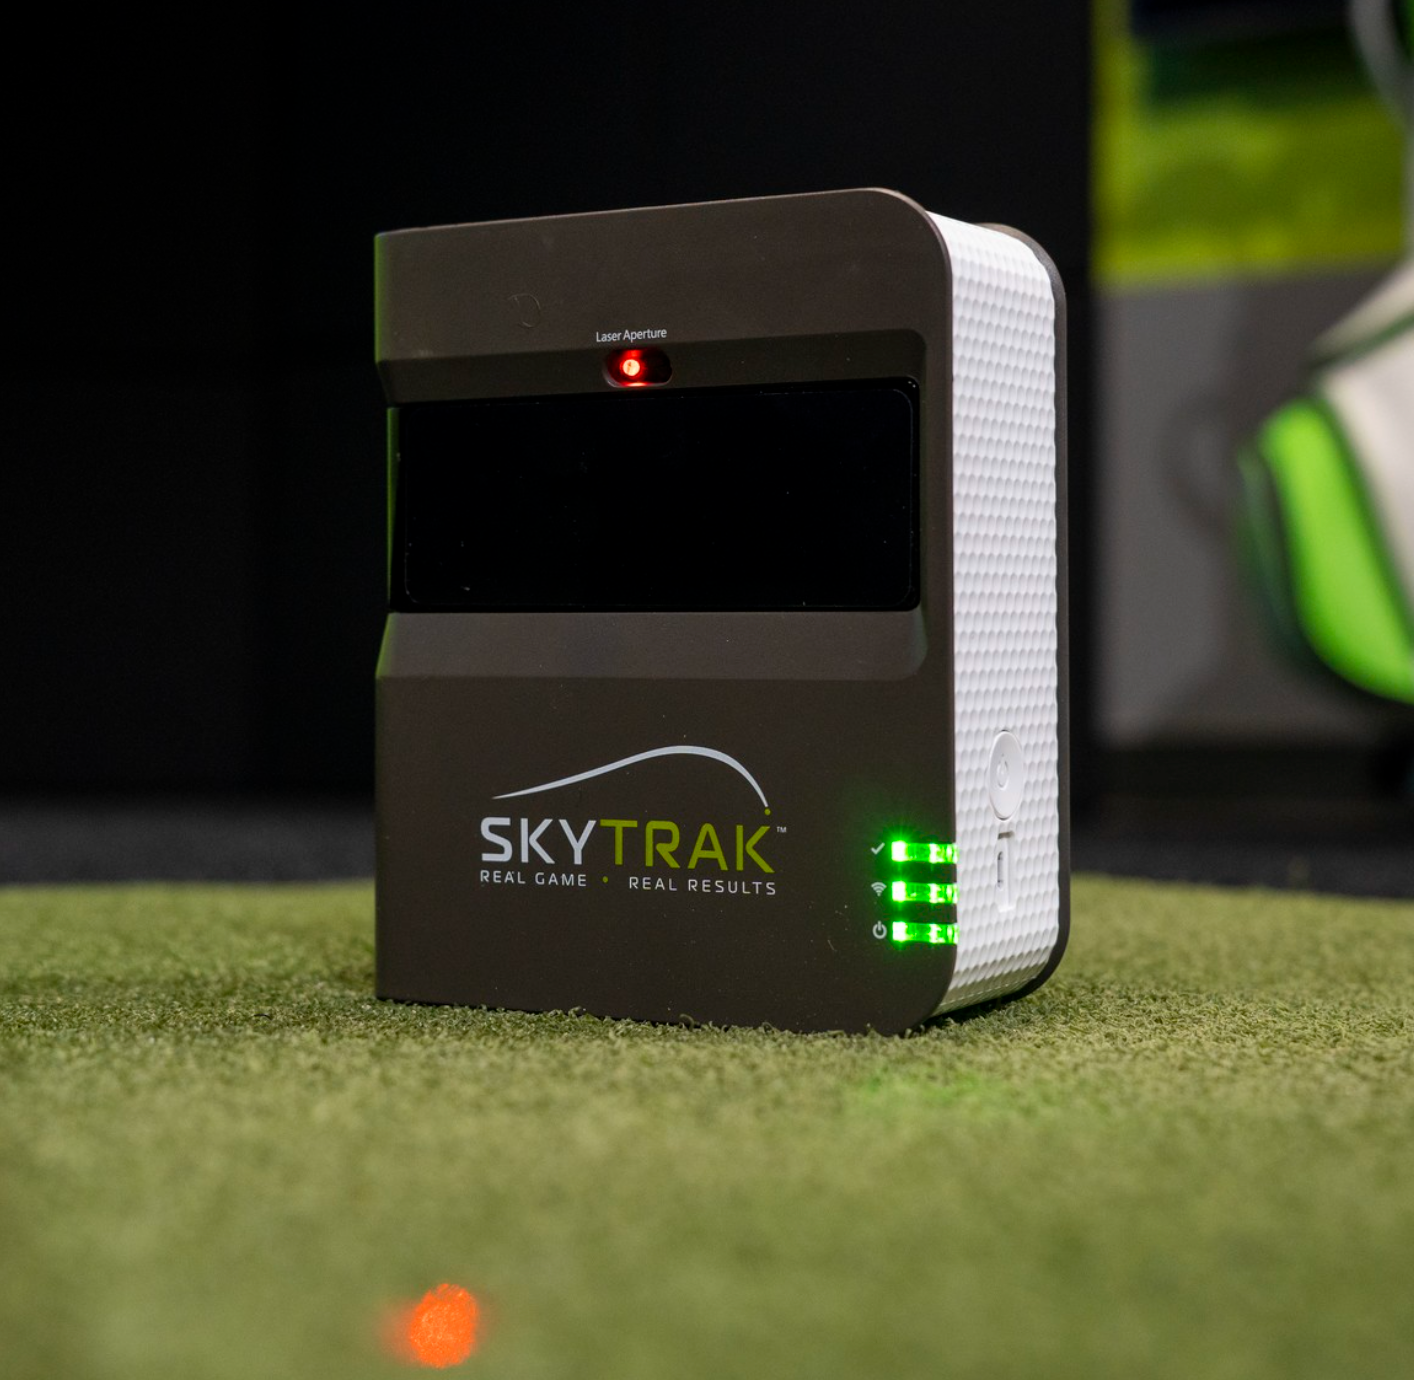 "INDOOR SWING SYNDROME" IS A COMMON PROBLEM WITH NEW SKYTRAK OWNERS